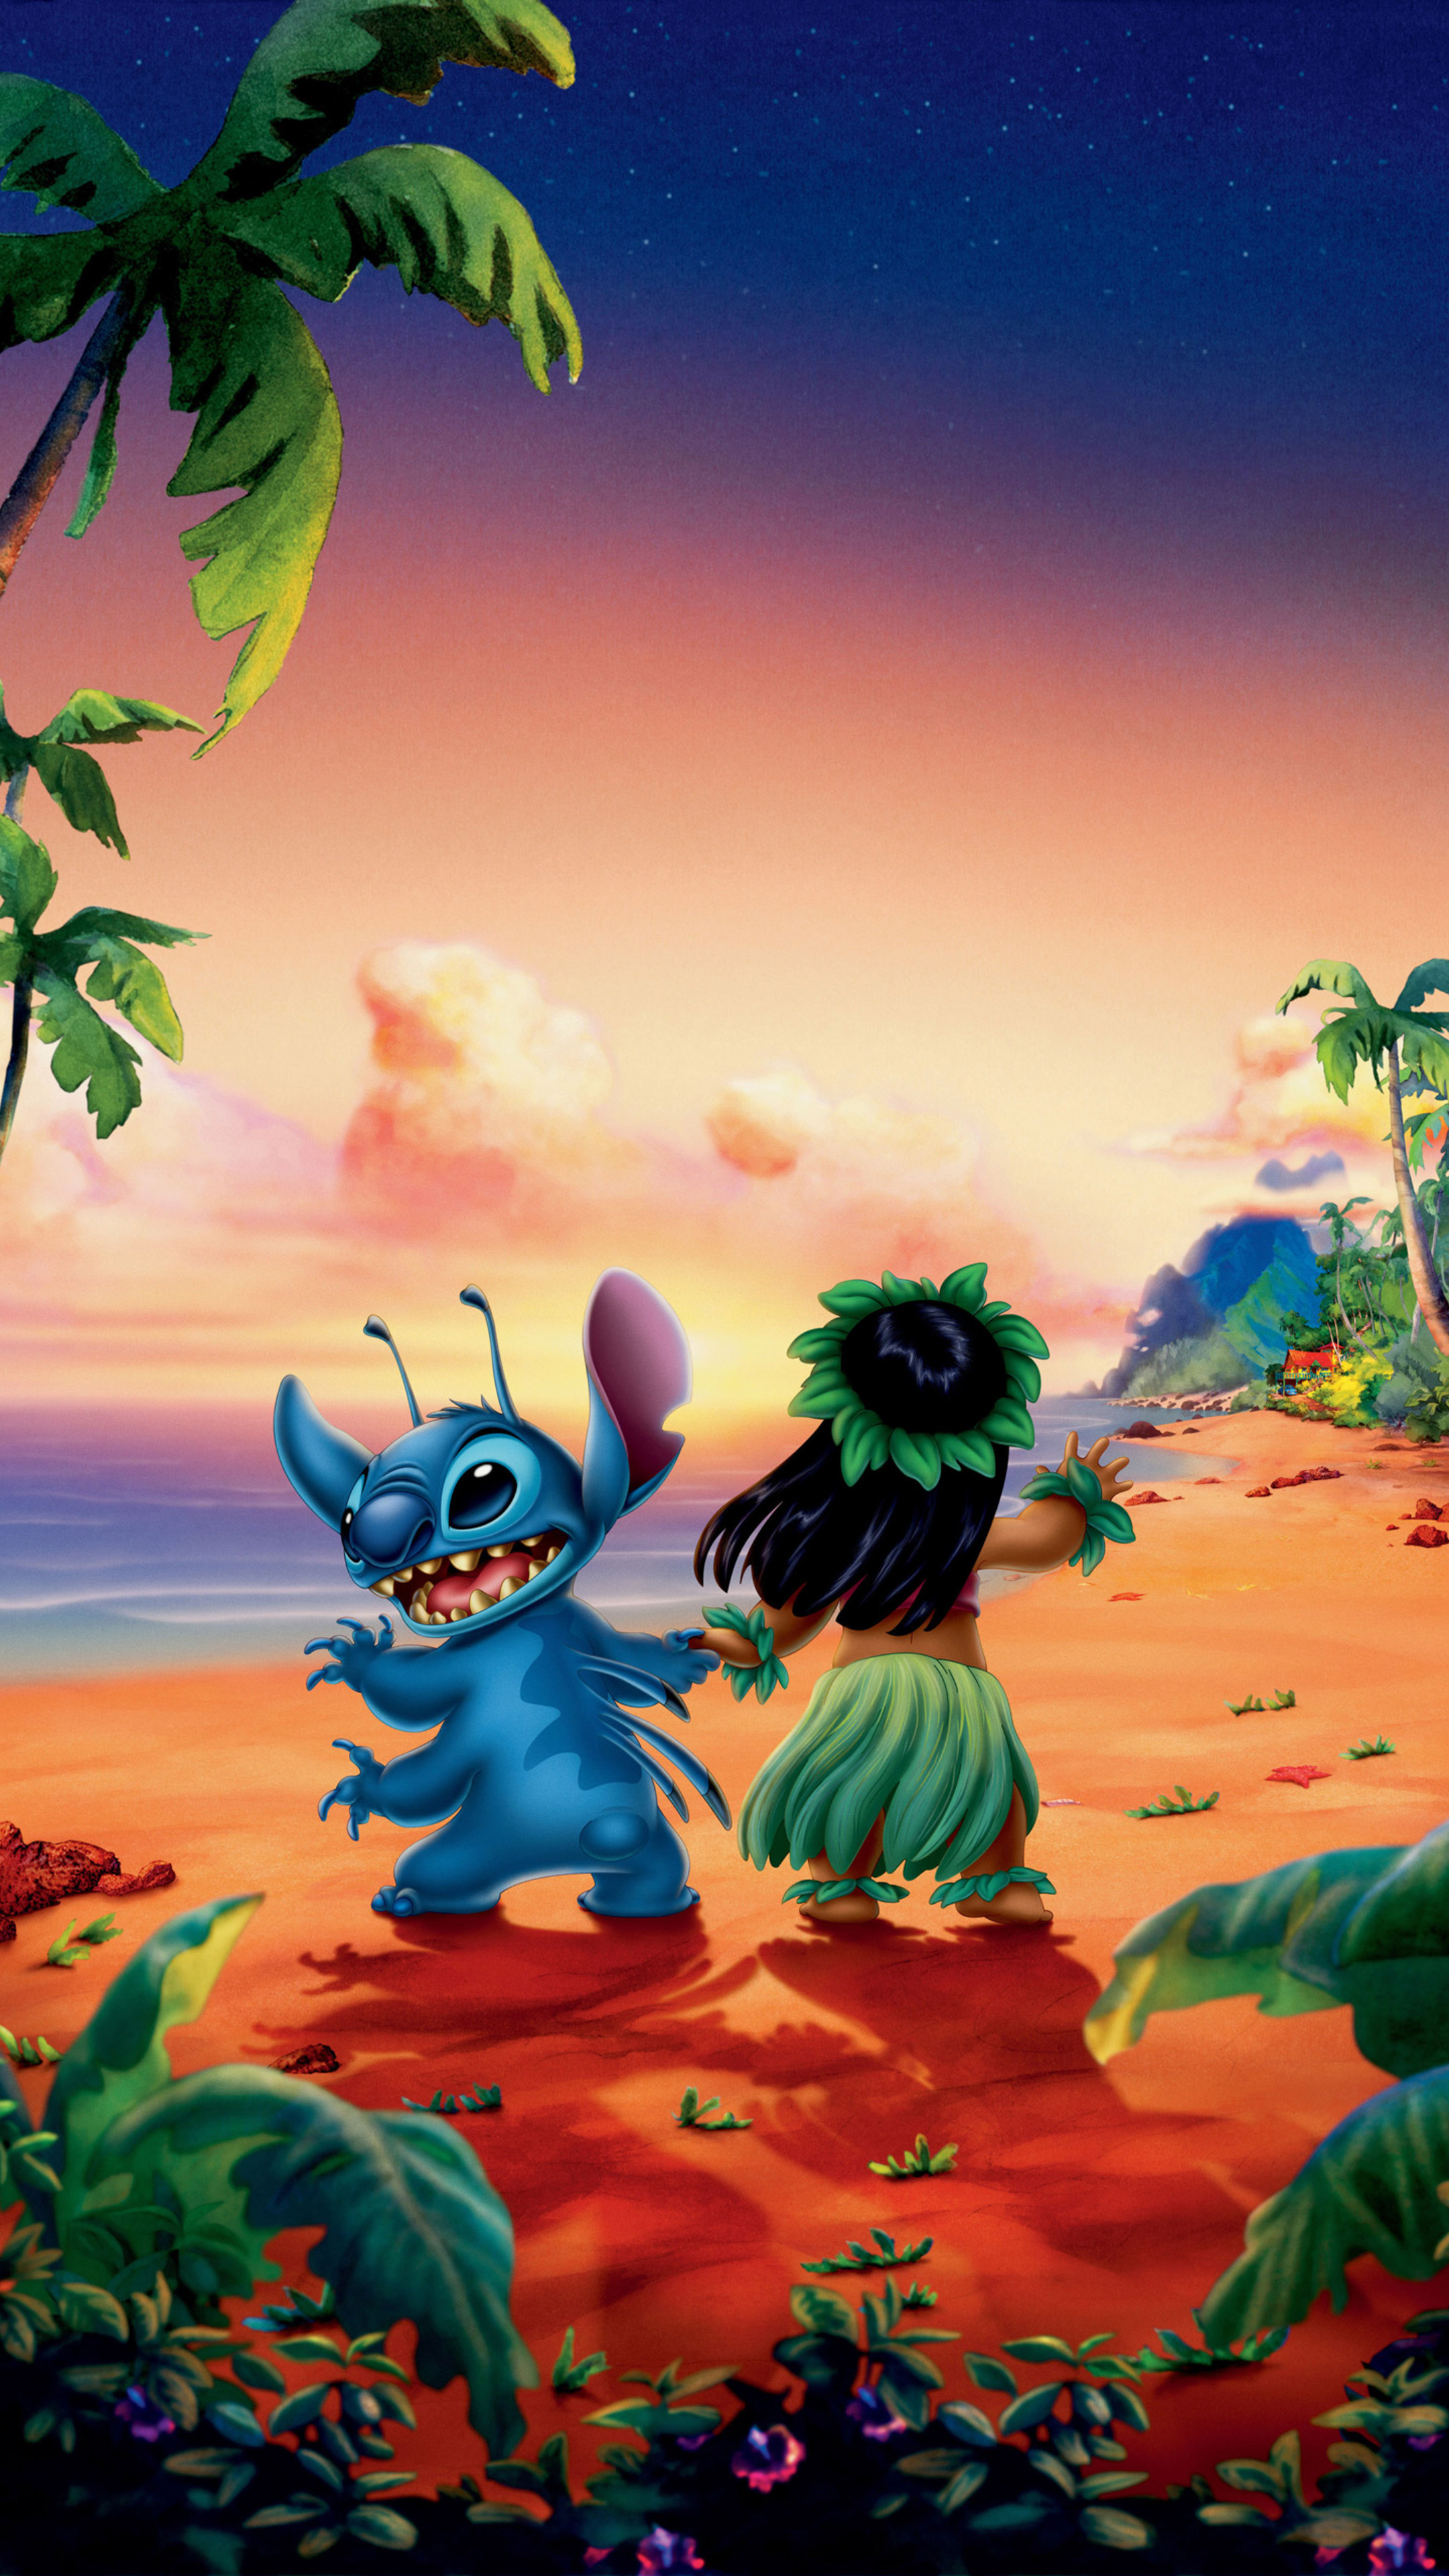 Stitch animation, Lilo and Stitch Sony Xperia wallpapers, HD 4K wallpapers, Photos, 2160x3840 4K Handy